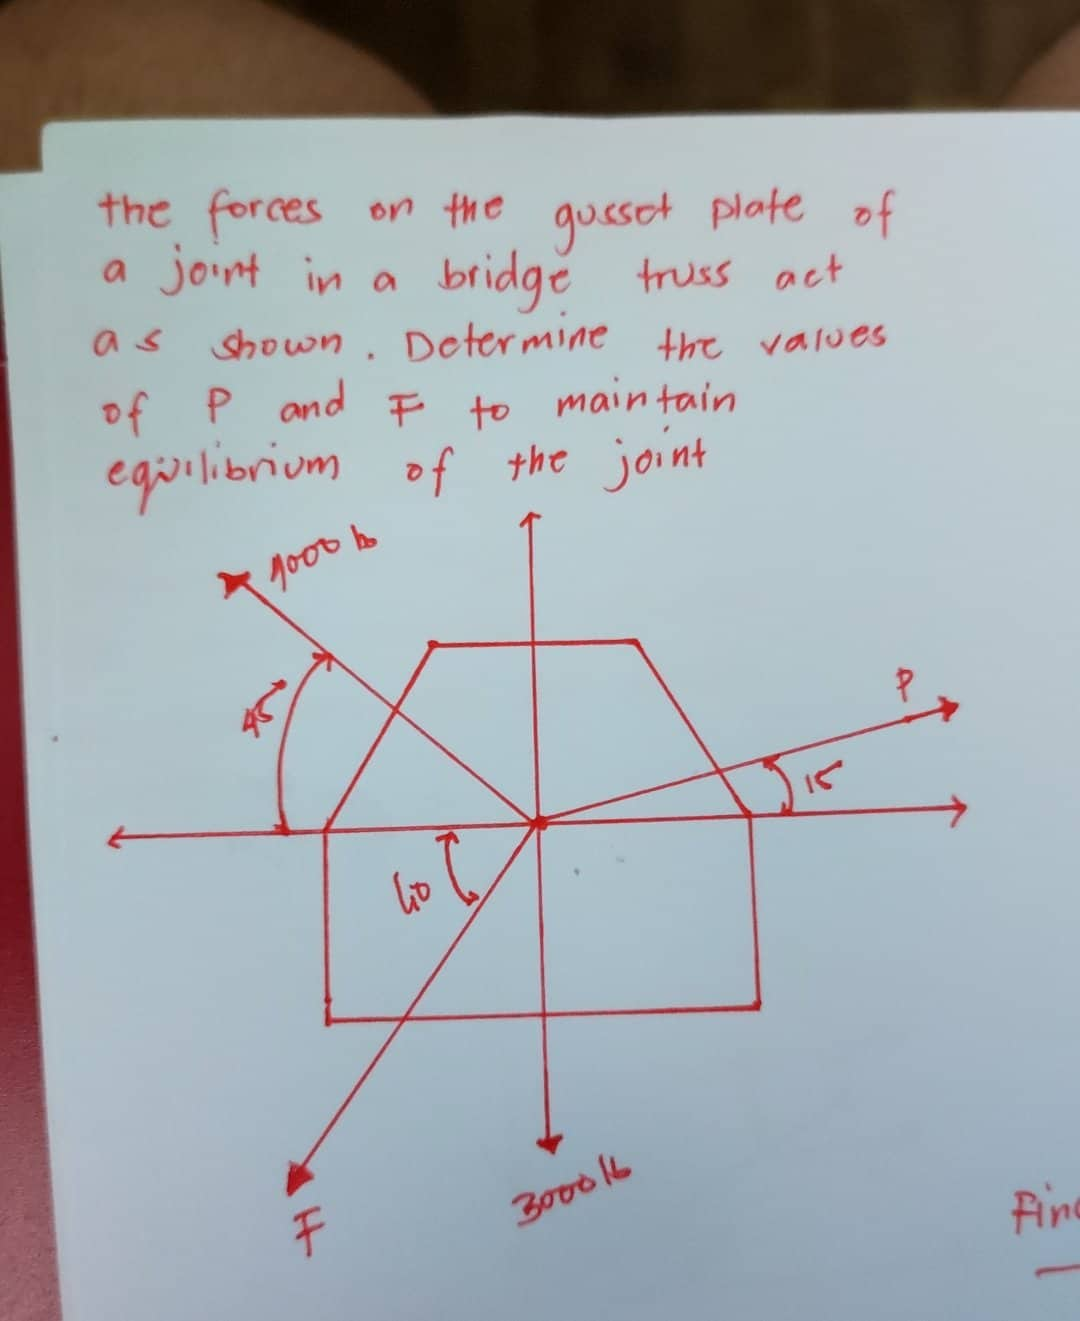 the forces on the gusset plate of
a joint in a
bridge truss act
as shown.
shown. Determine the values
of P and F to maintain
equilibrium of the joint
ж 1000 в
b
to
300016
Jir
Fine